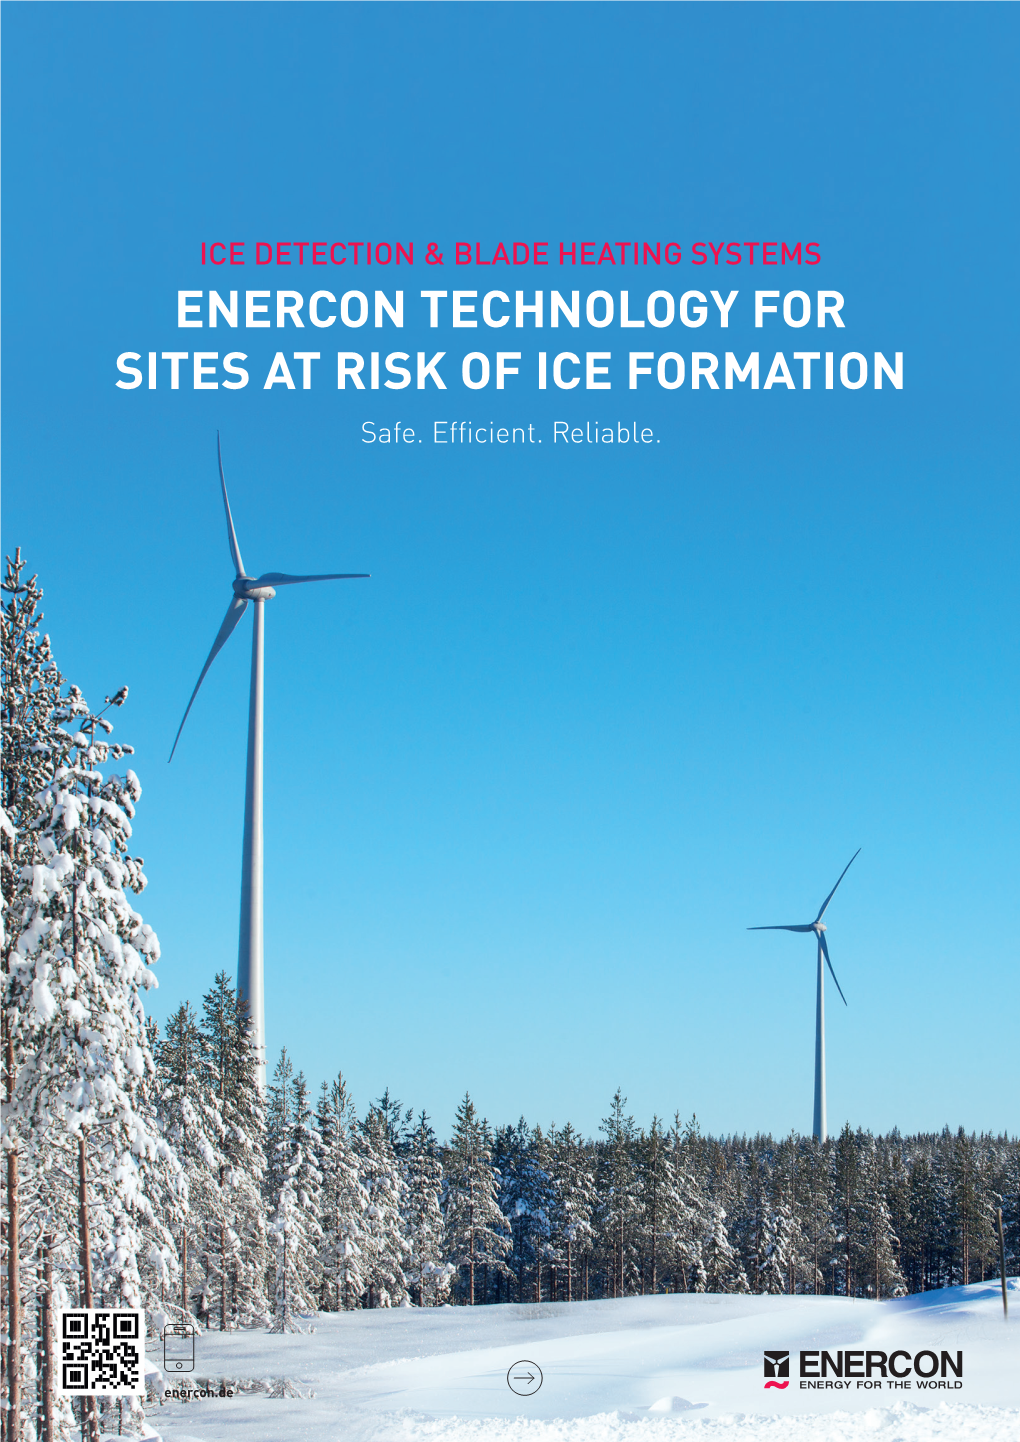 Ice Detection & Blade Heating Systems ENERCON Technology for Sites At